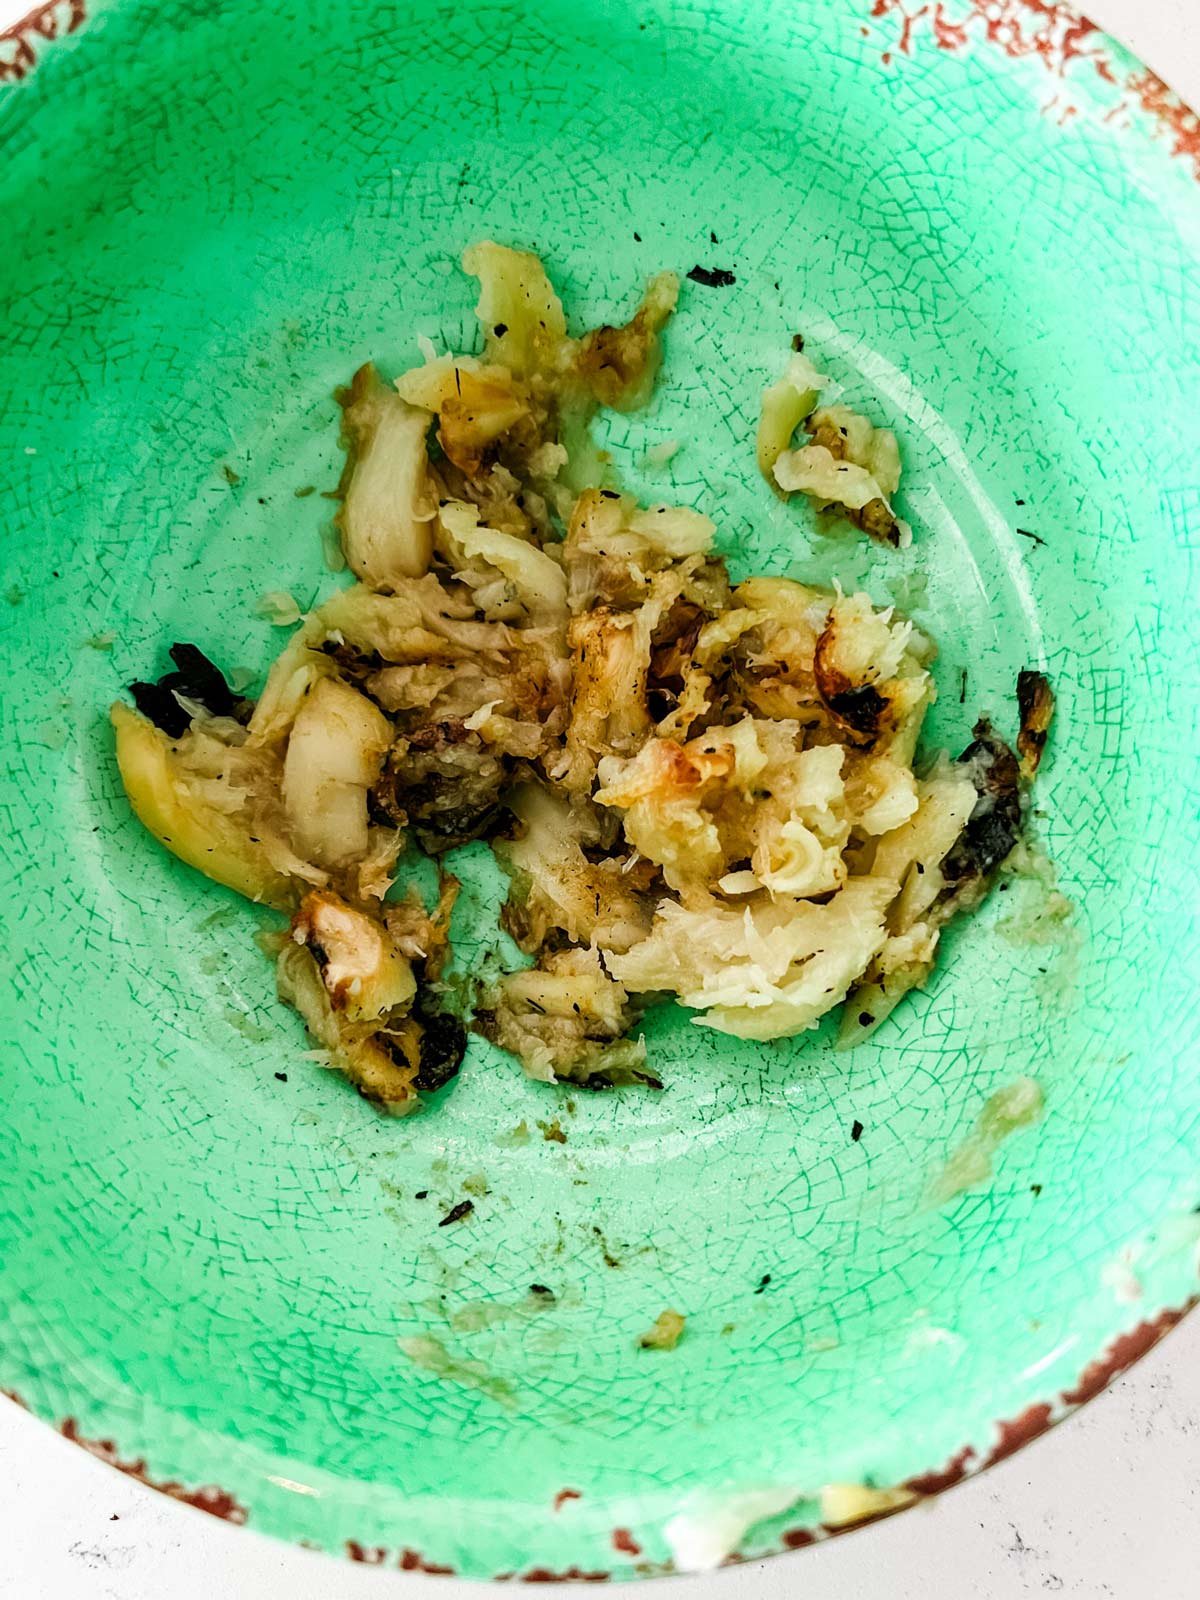 Mashed garlic in a small green bowl.